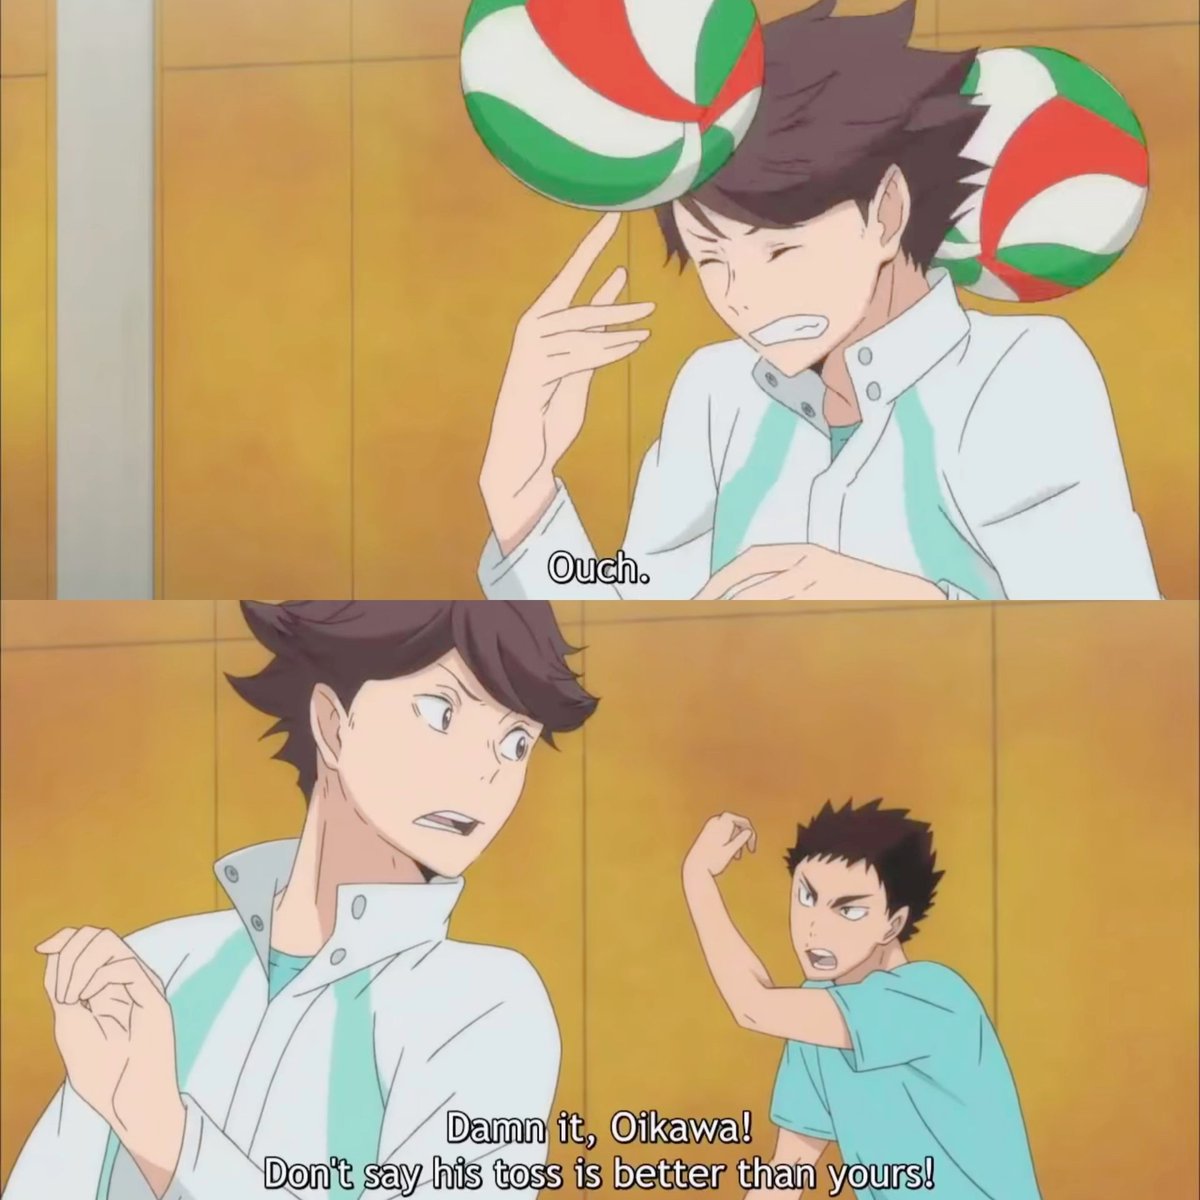 when oiks was rambling about how despite kags was unmatched at tosses, kags but lacked in serving, blocking, and spiking etc. and you know what iwa did? well, first he threw a volleyball at oikawa's face. then he told oiks, "dont say his toss is better than yours!" :((